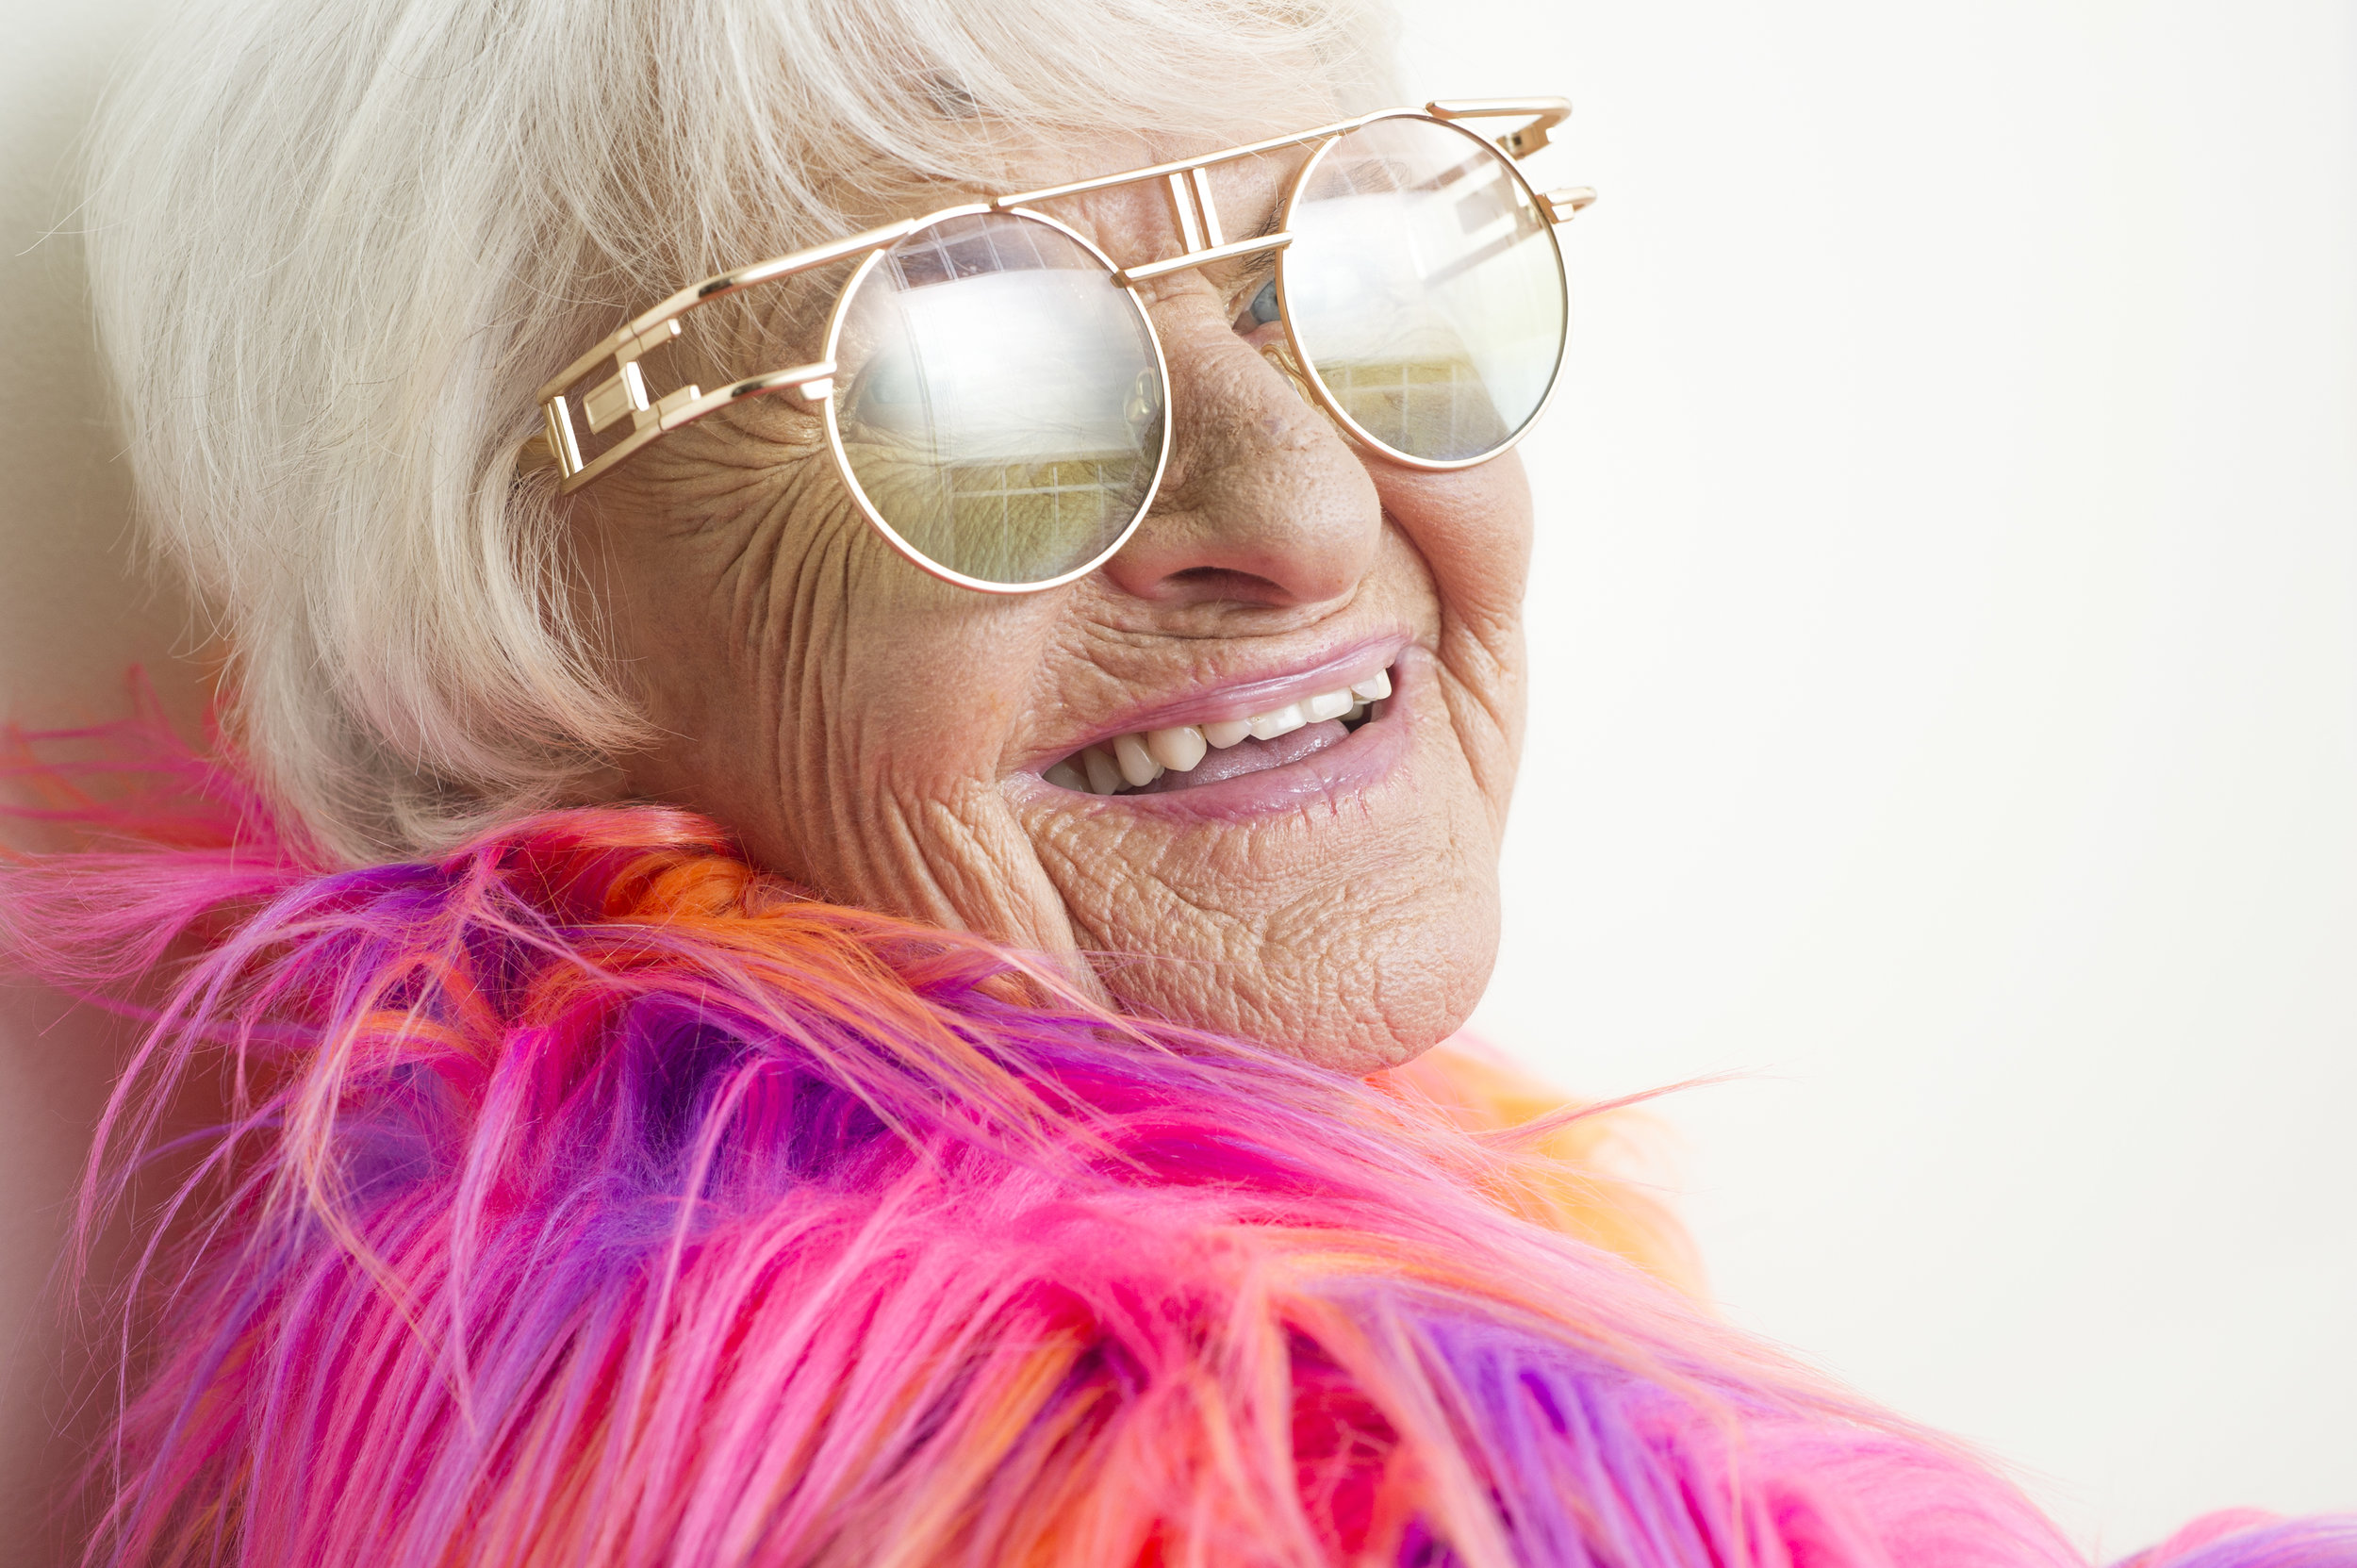  Instagram personality Baddie Winkle, for the Knoxville News Sentinel 